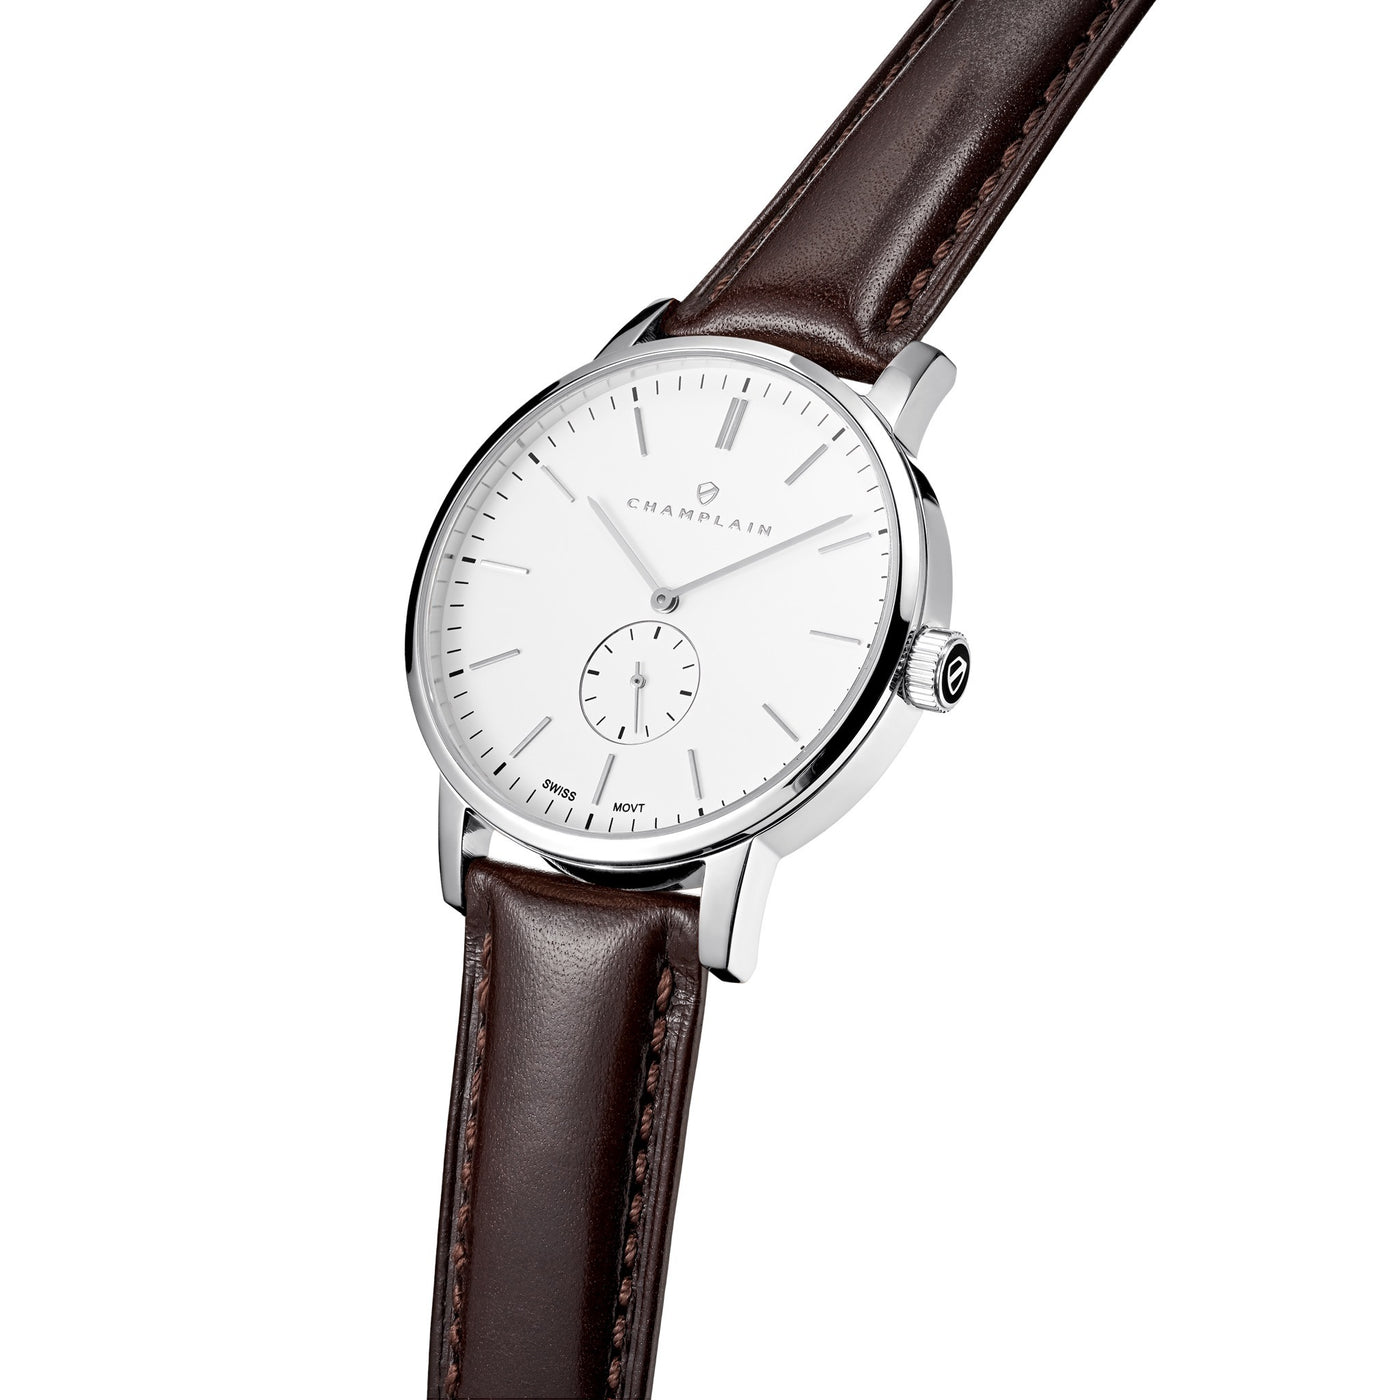 Silver/White - Brown Governor Watch by Champlain